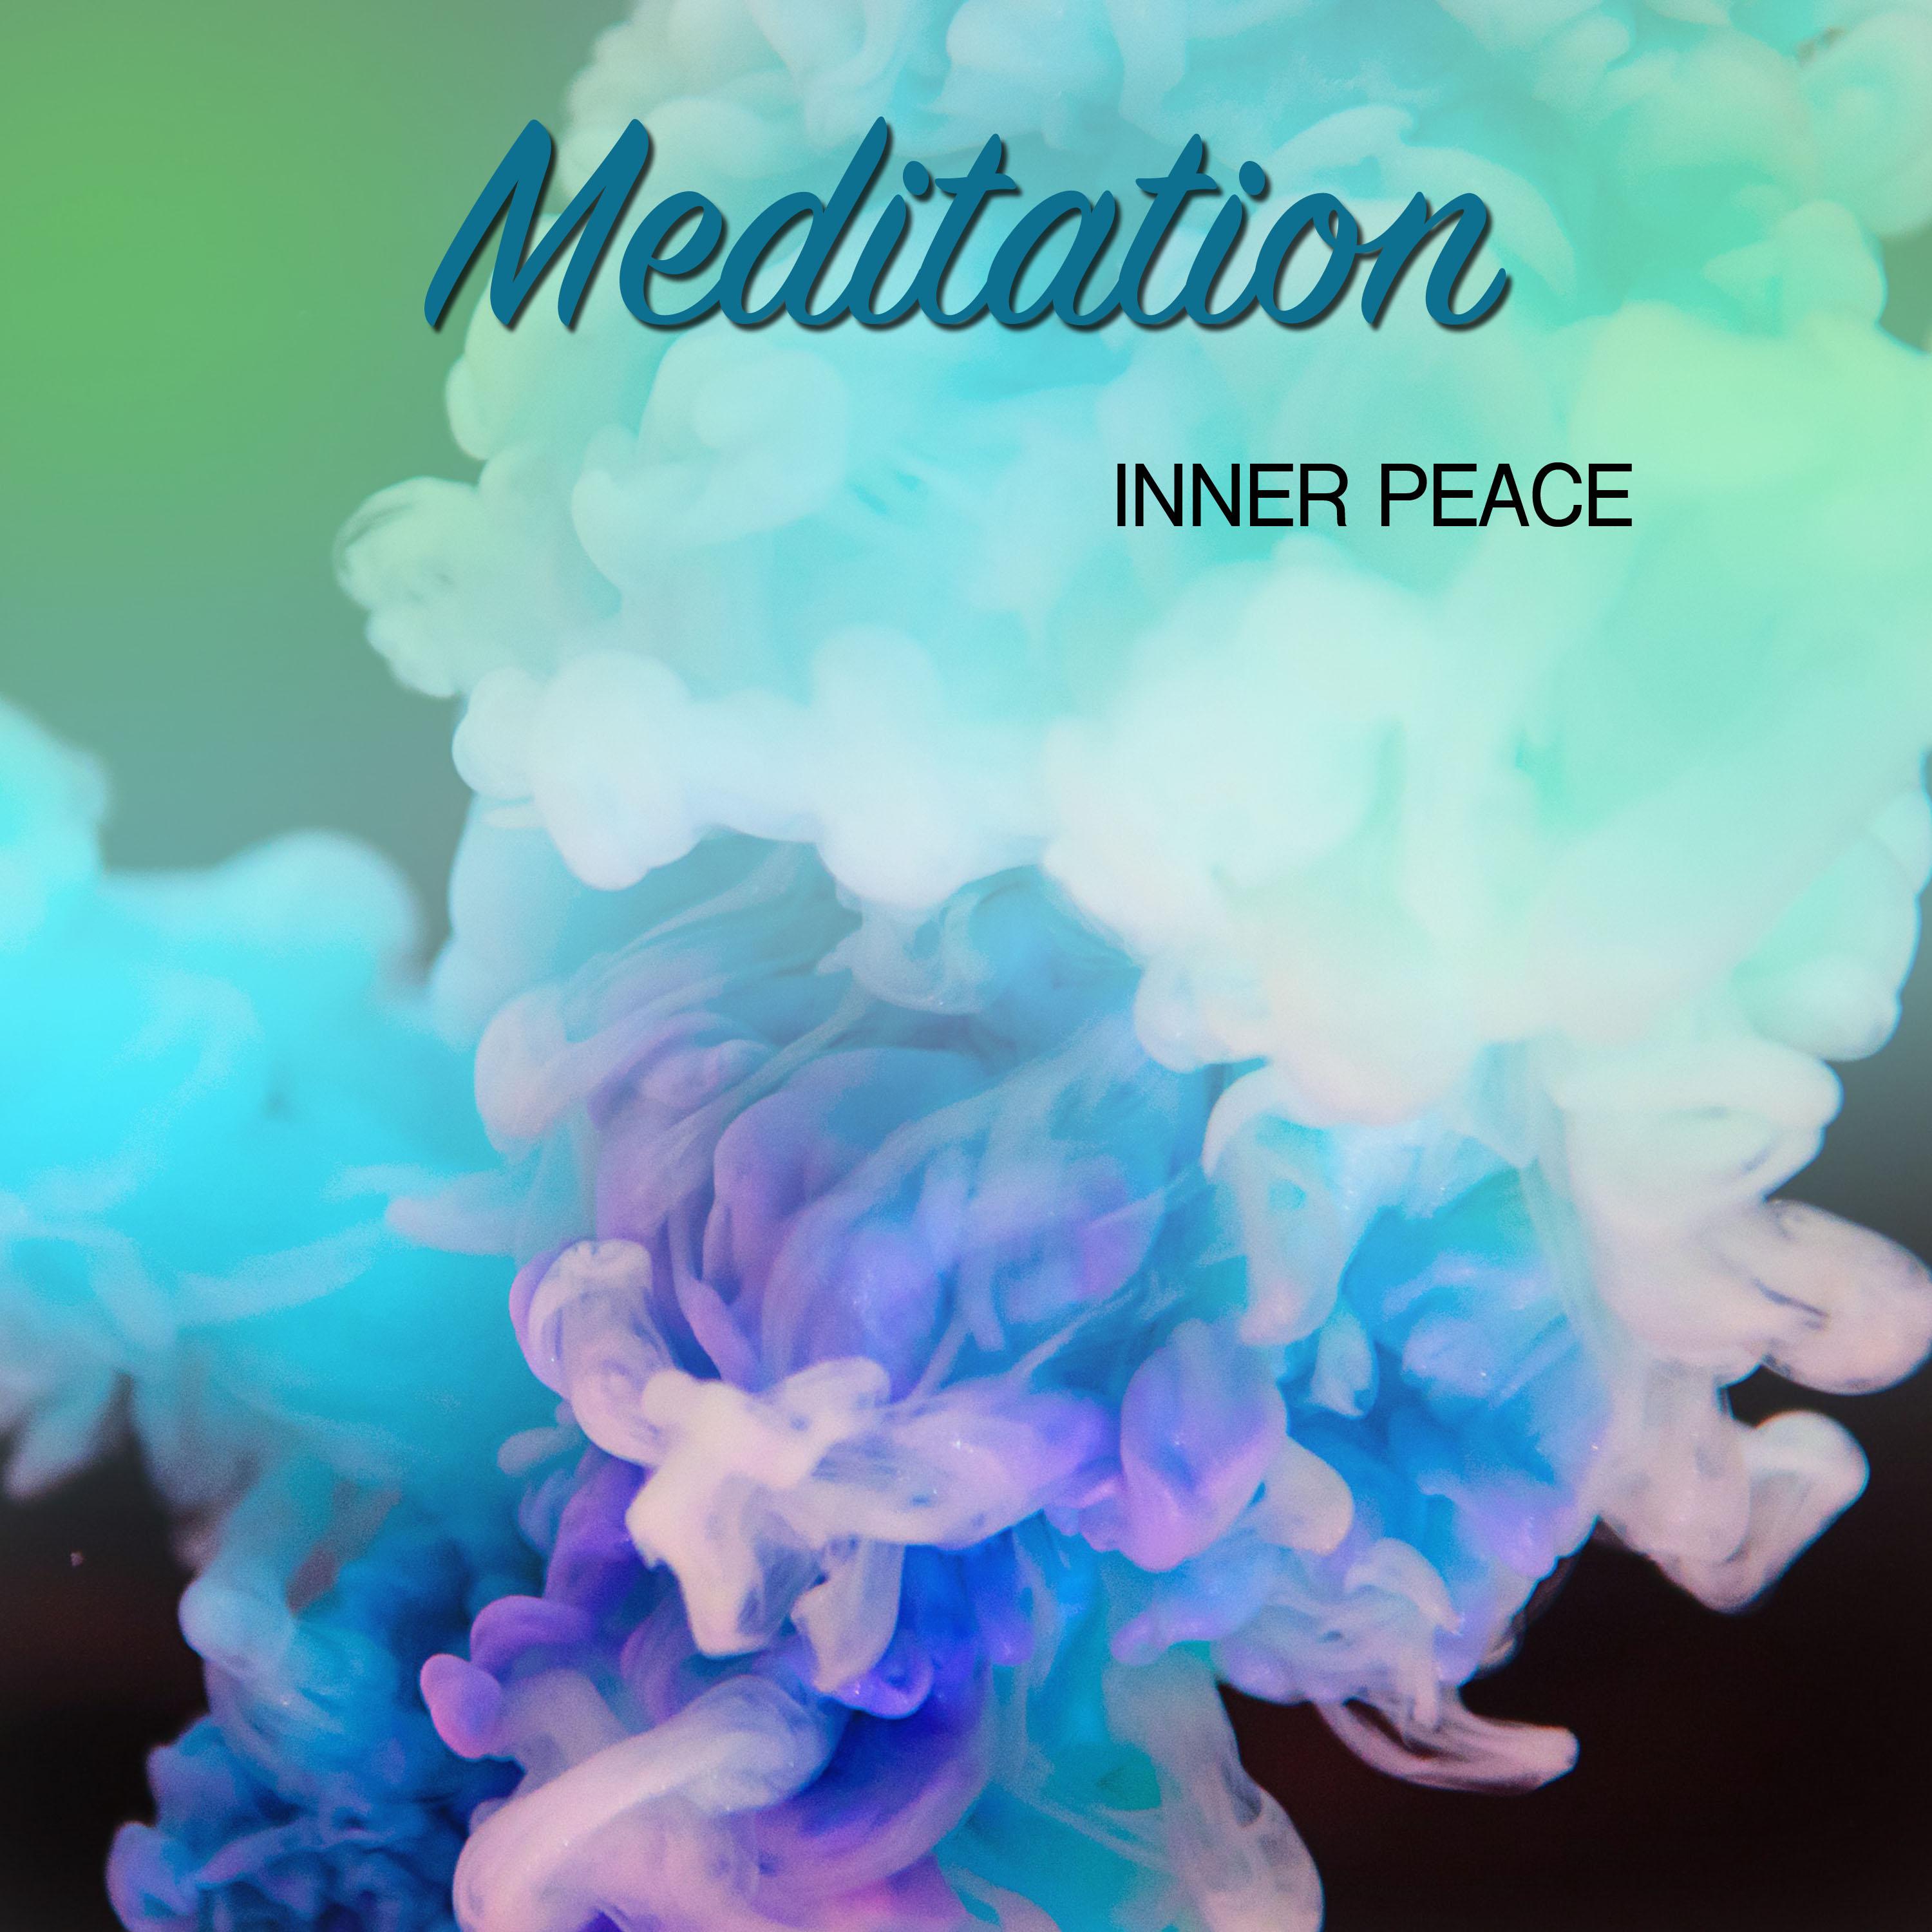 22 Songs to Help Guide Meditation and Find Inner Peace